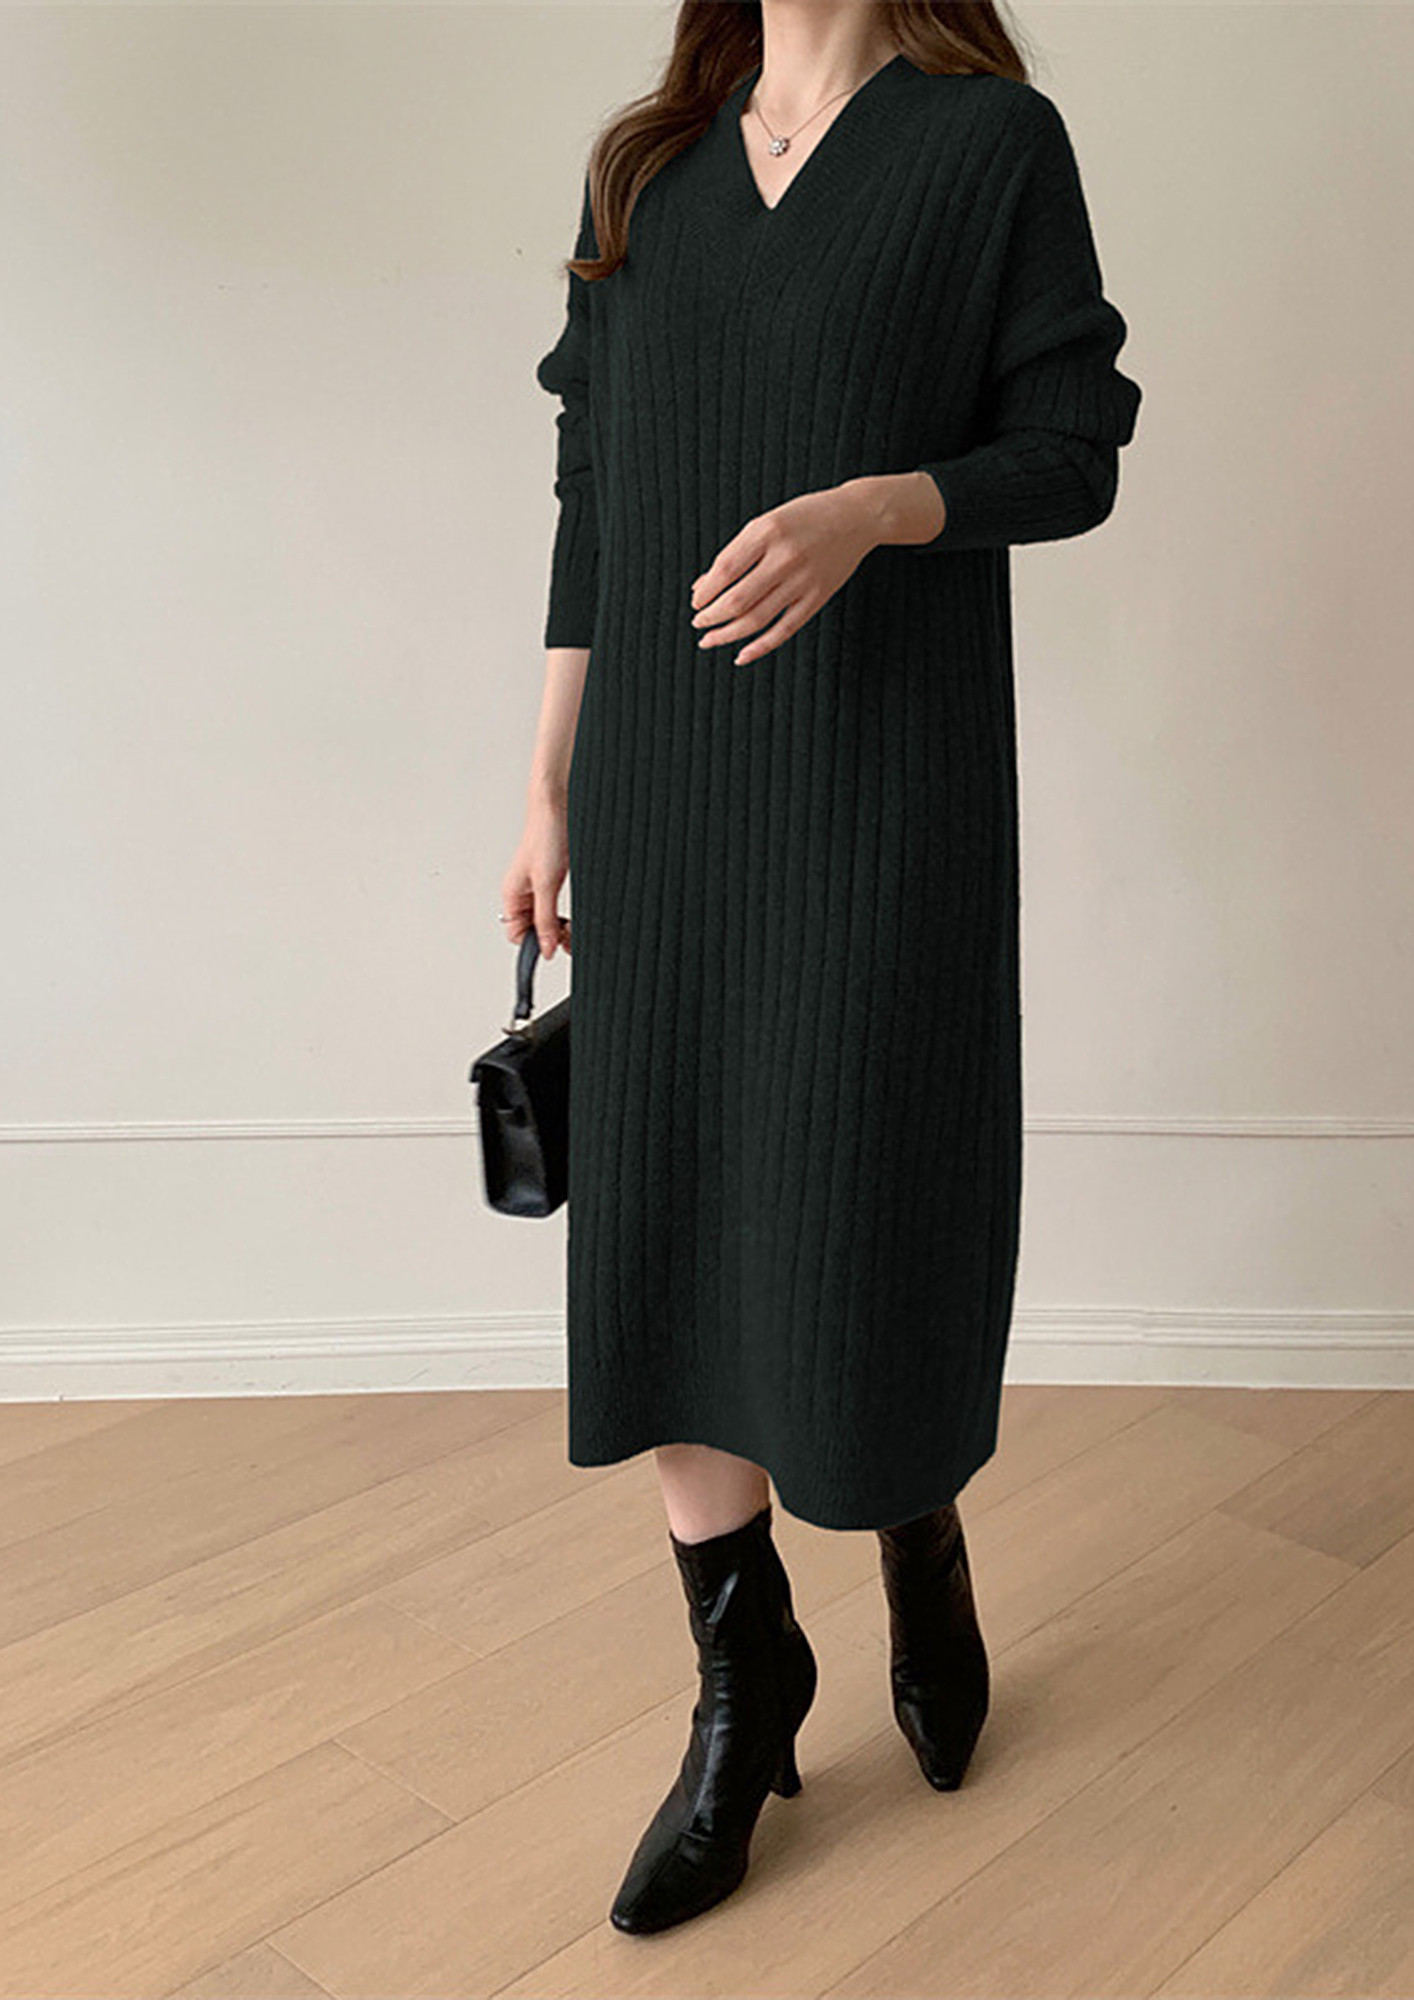 How To Wear A Sweater Dress With Boots & Shoes | NA-KD